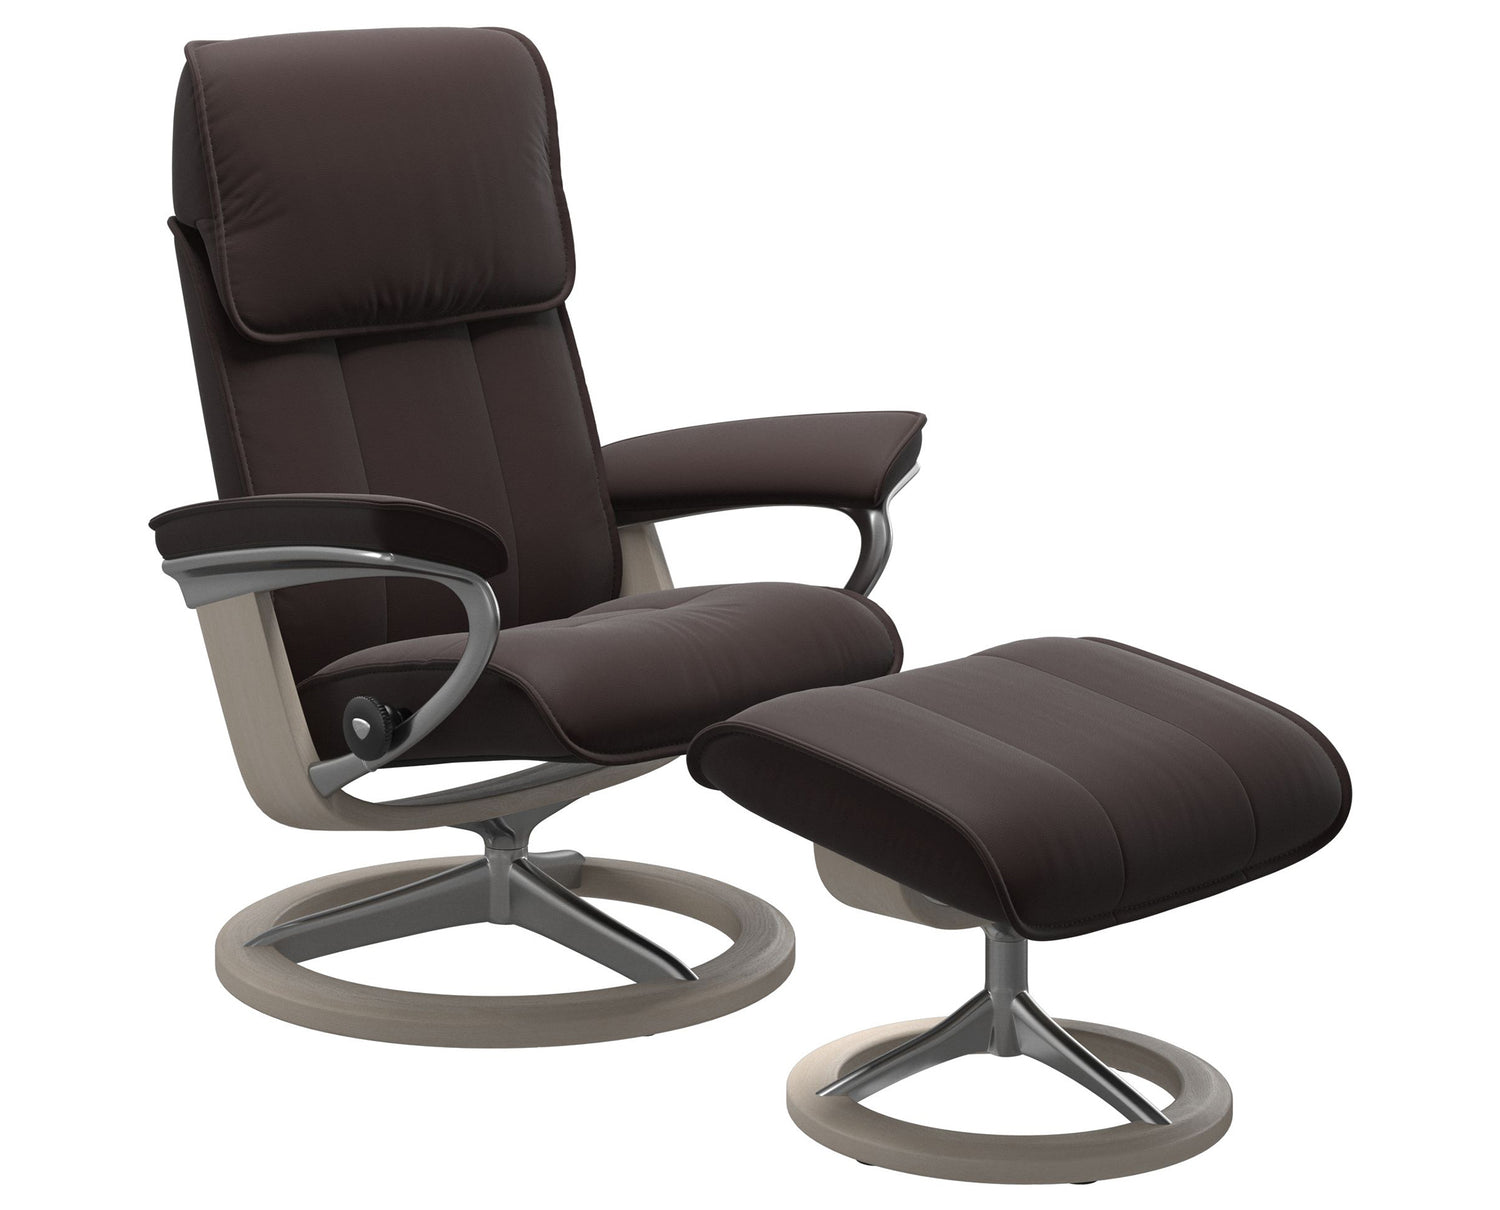 Paloma Leather Chocolate M/L and Whitewash Base | Stressless Admiral Signature Recliner | Valley Ridge Furniture